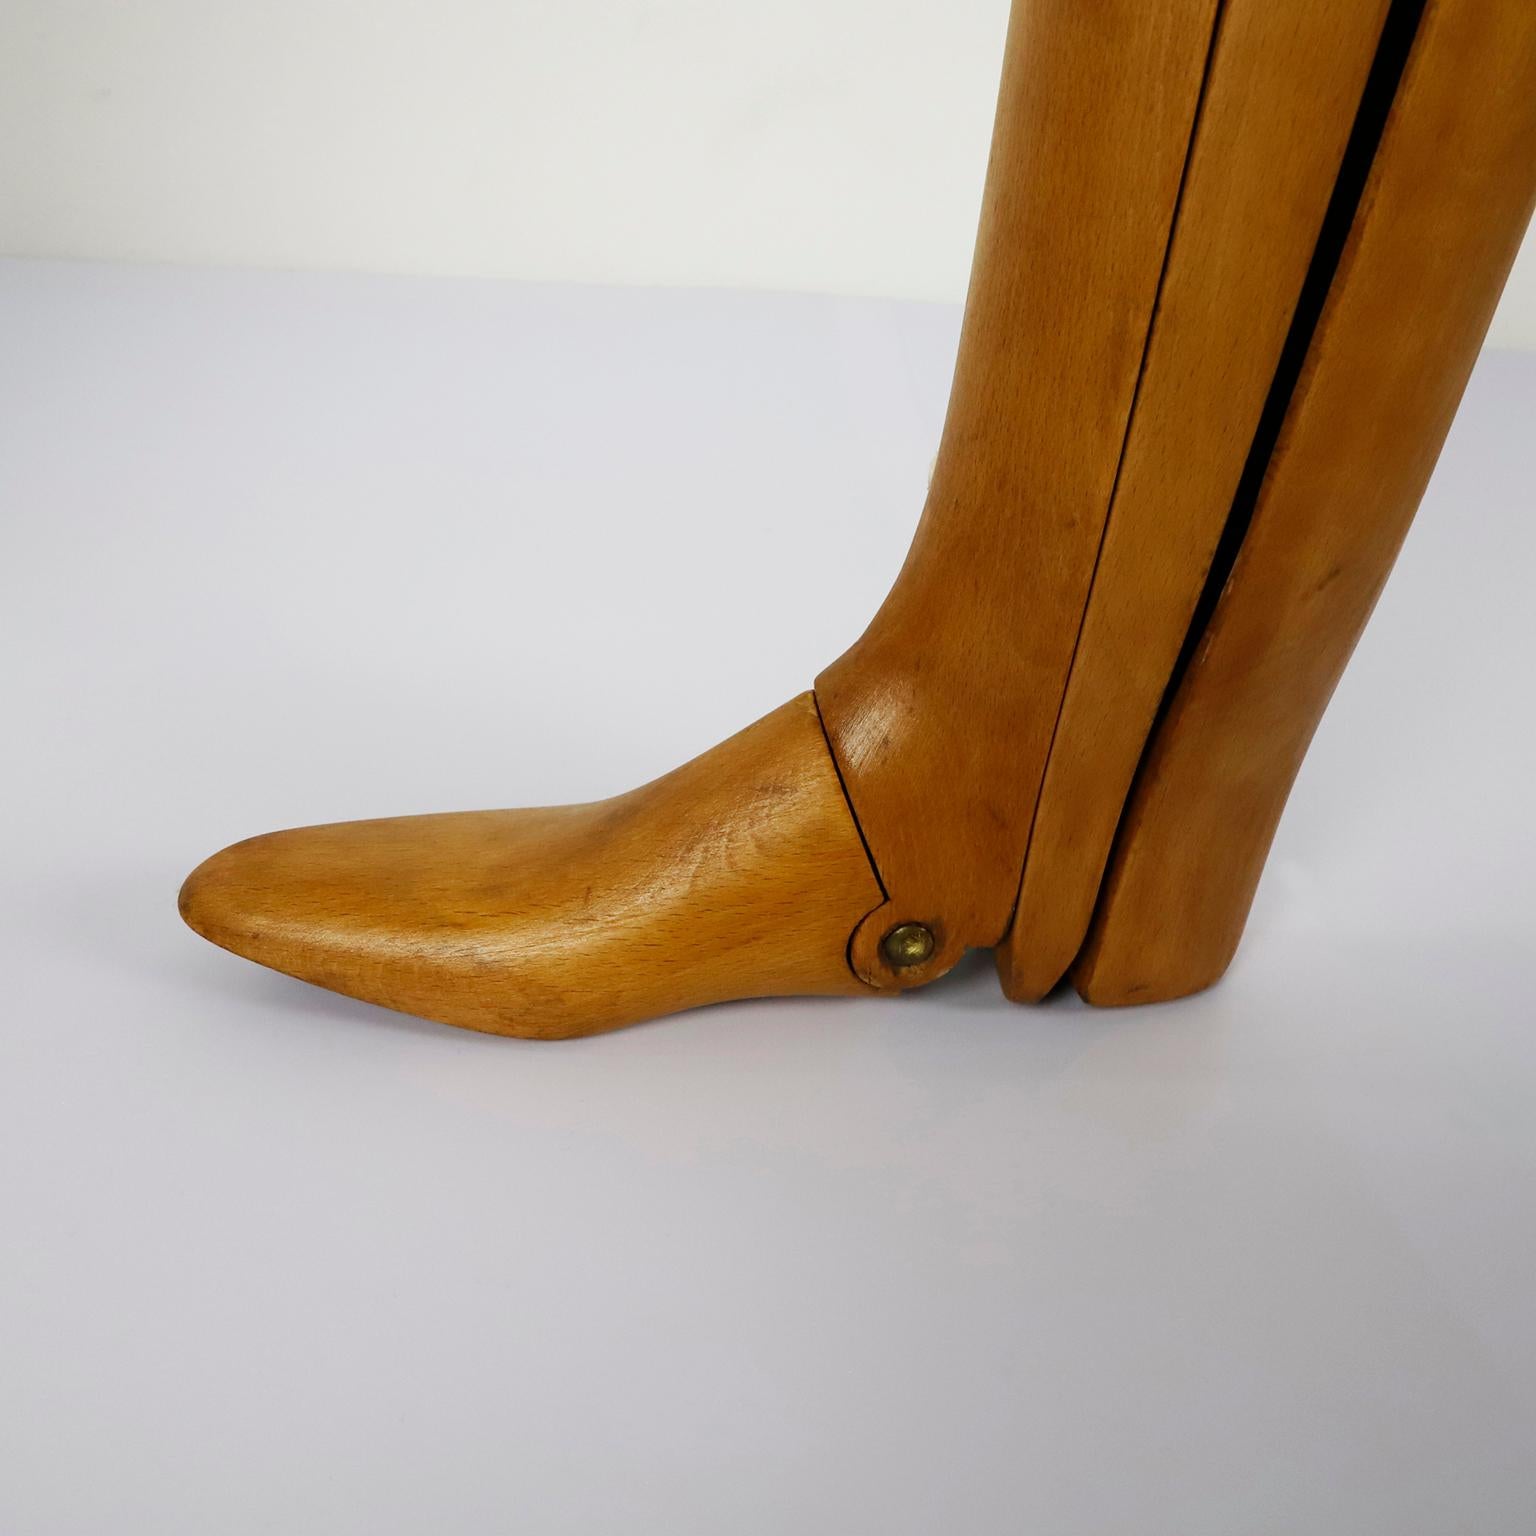 Circa 1960, we offer this pair of antique boots lasts.